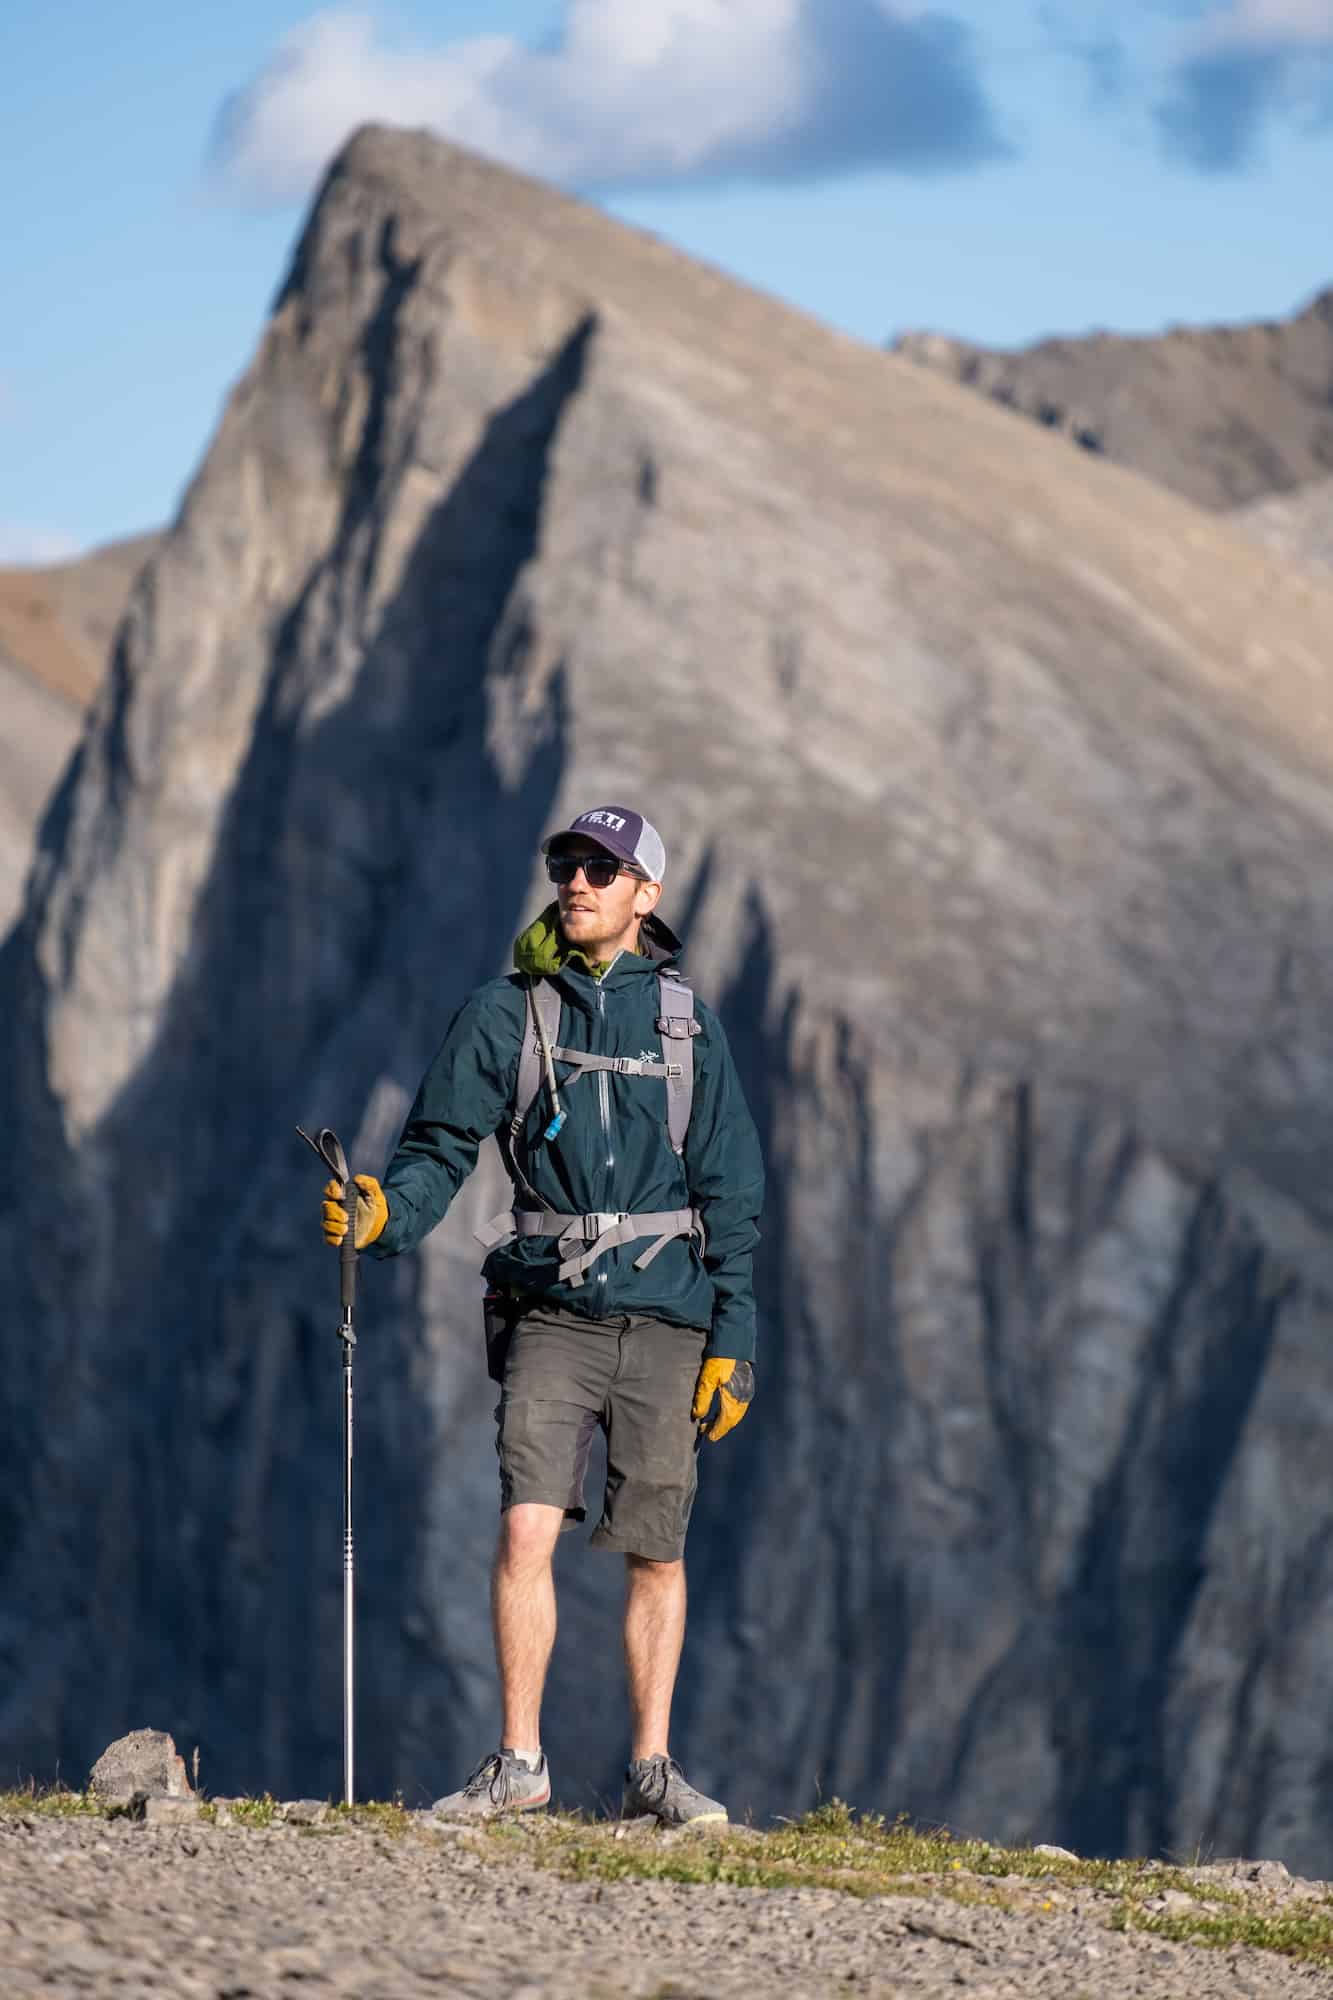 How to dress when hiking, where there's a possibility of being